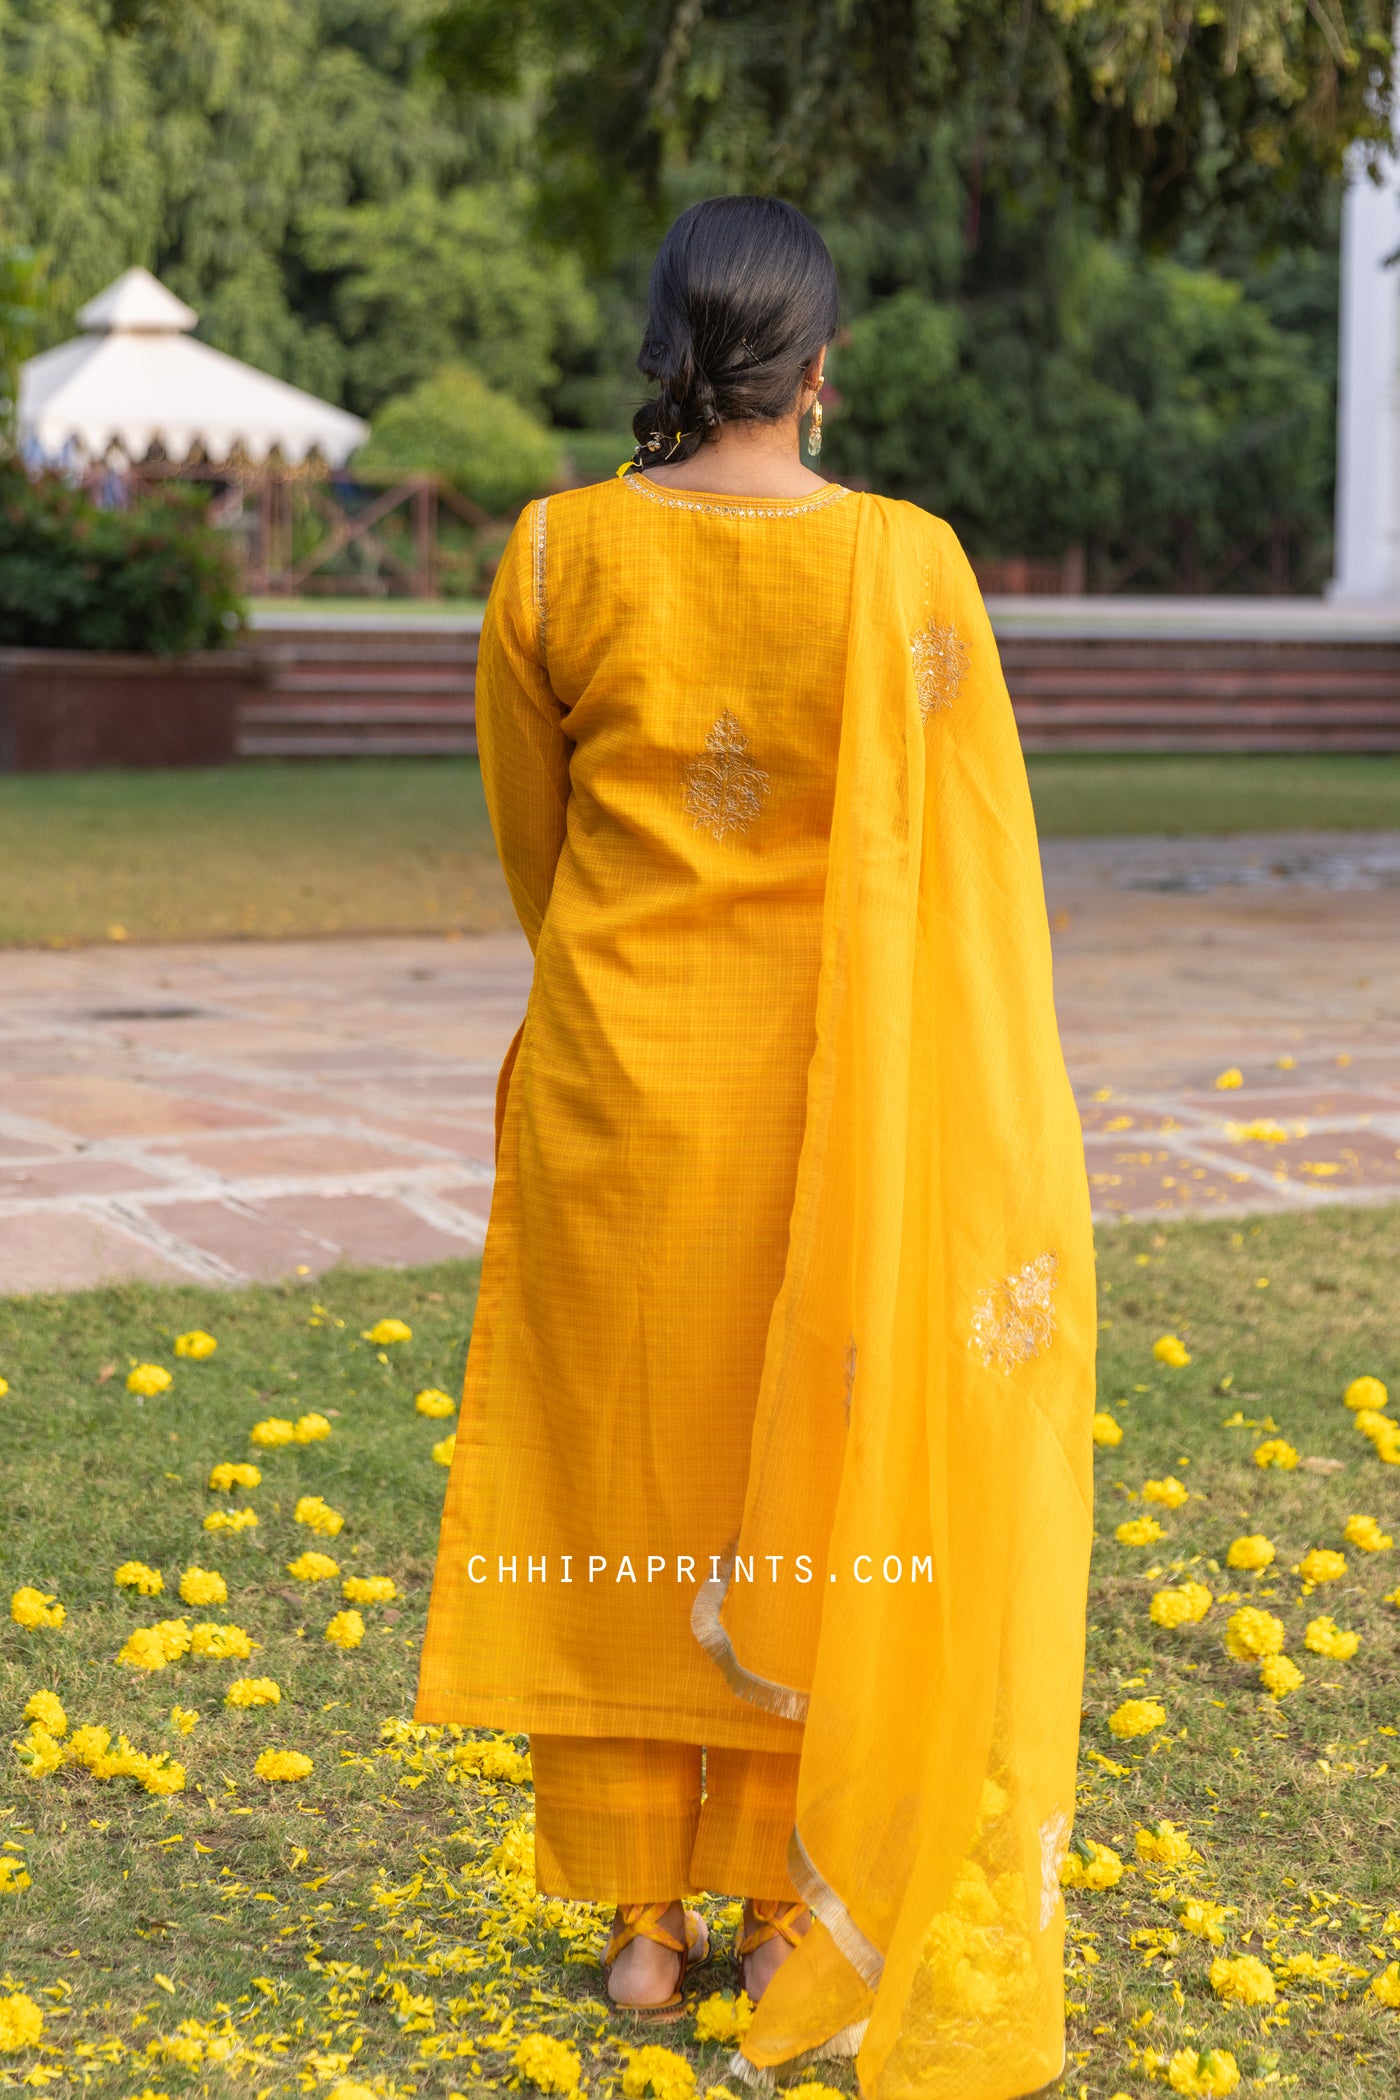 Chanderi Kota Checks Suit Set with Hand Embroidery in Golden Yellow